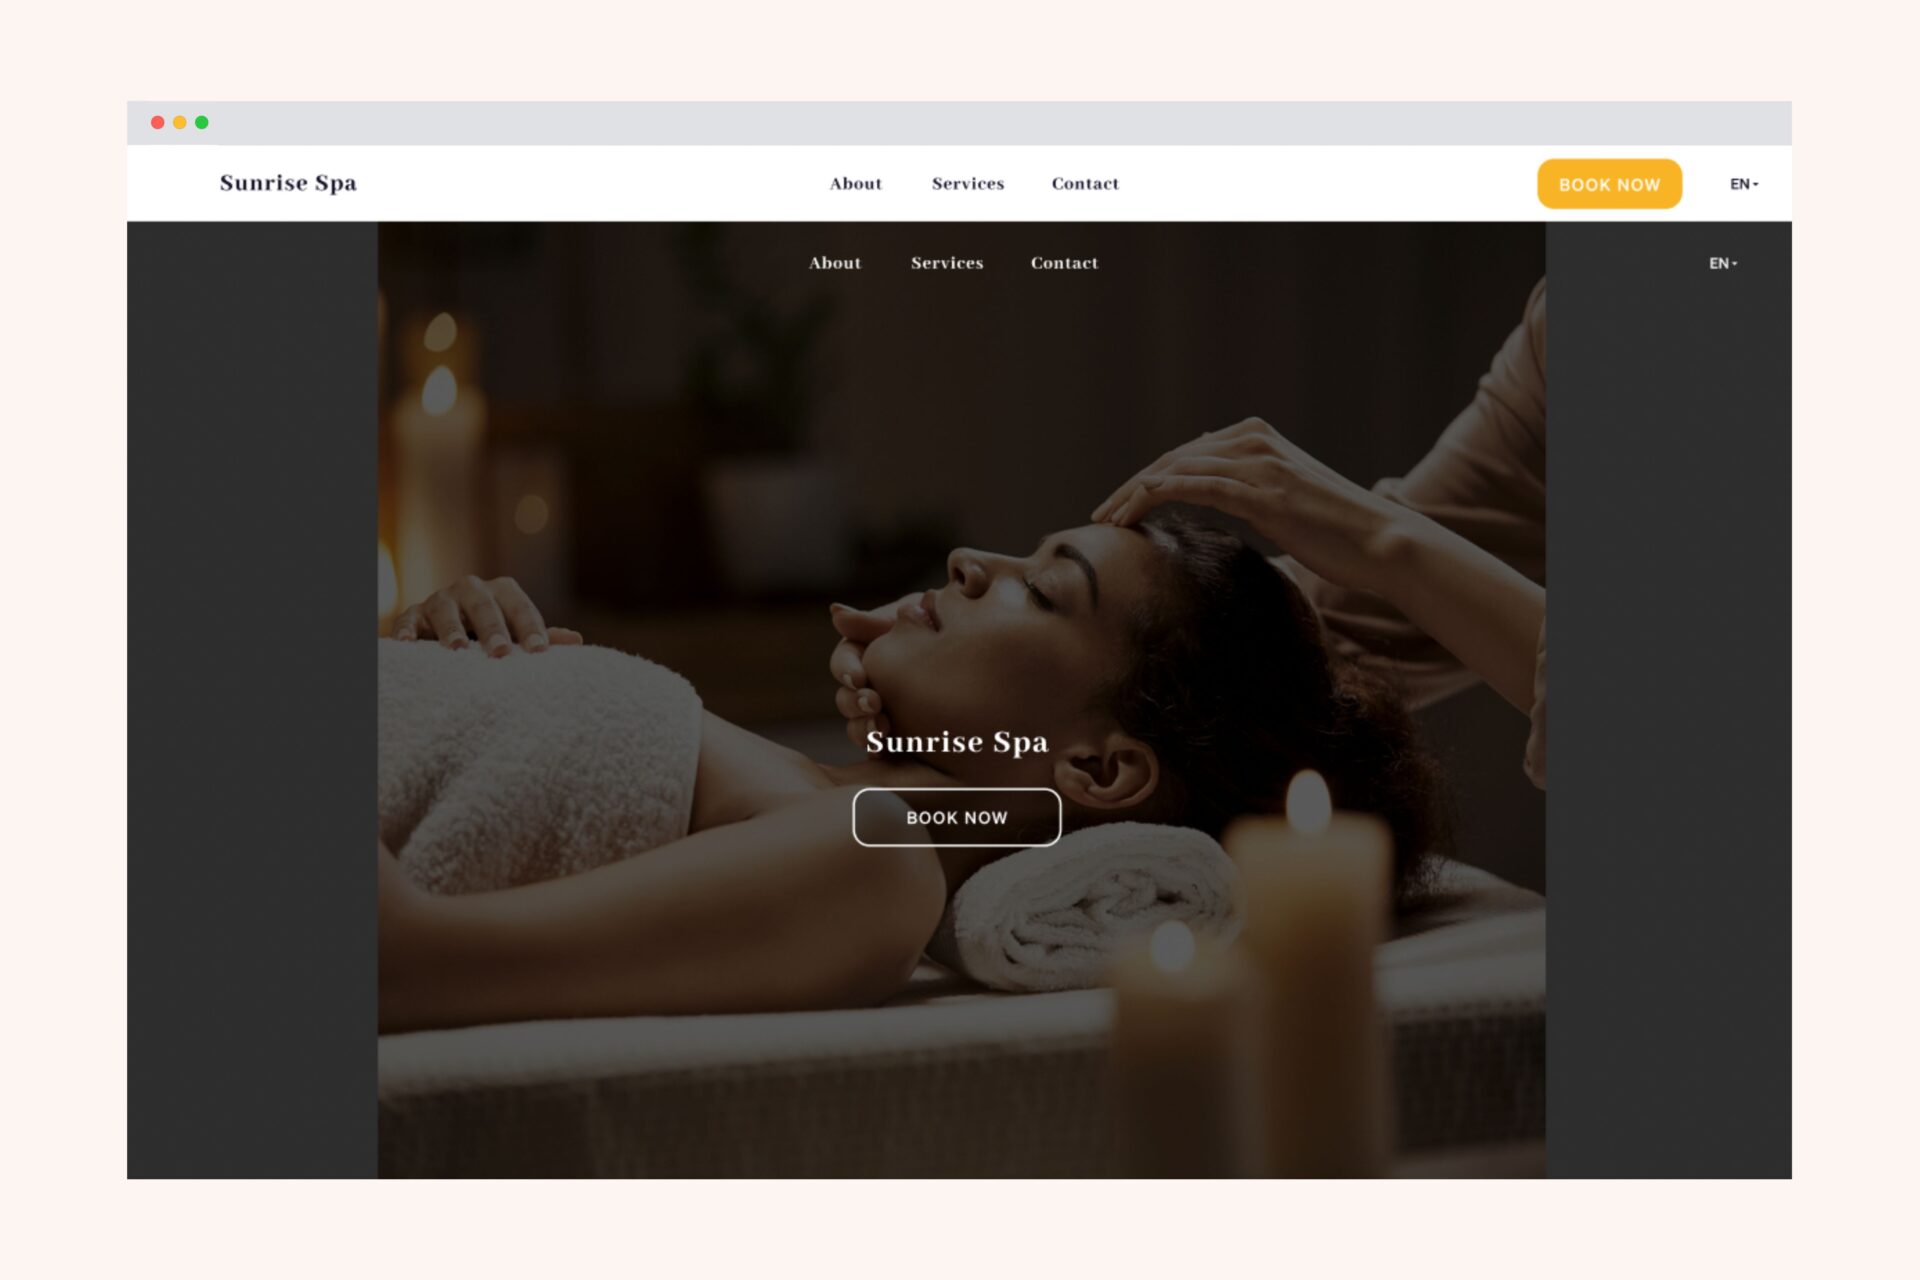 Online booking system for spas